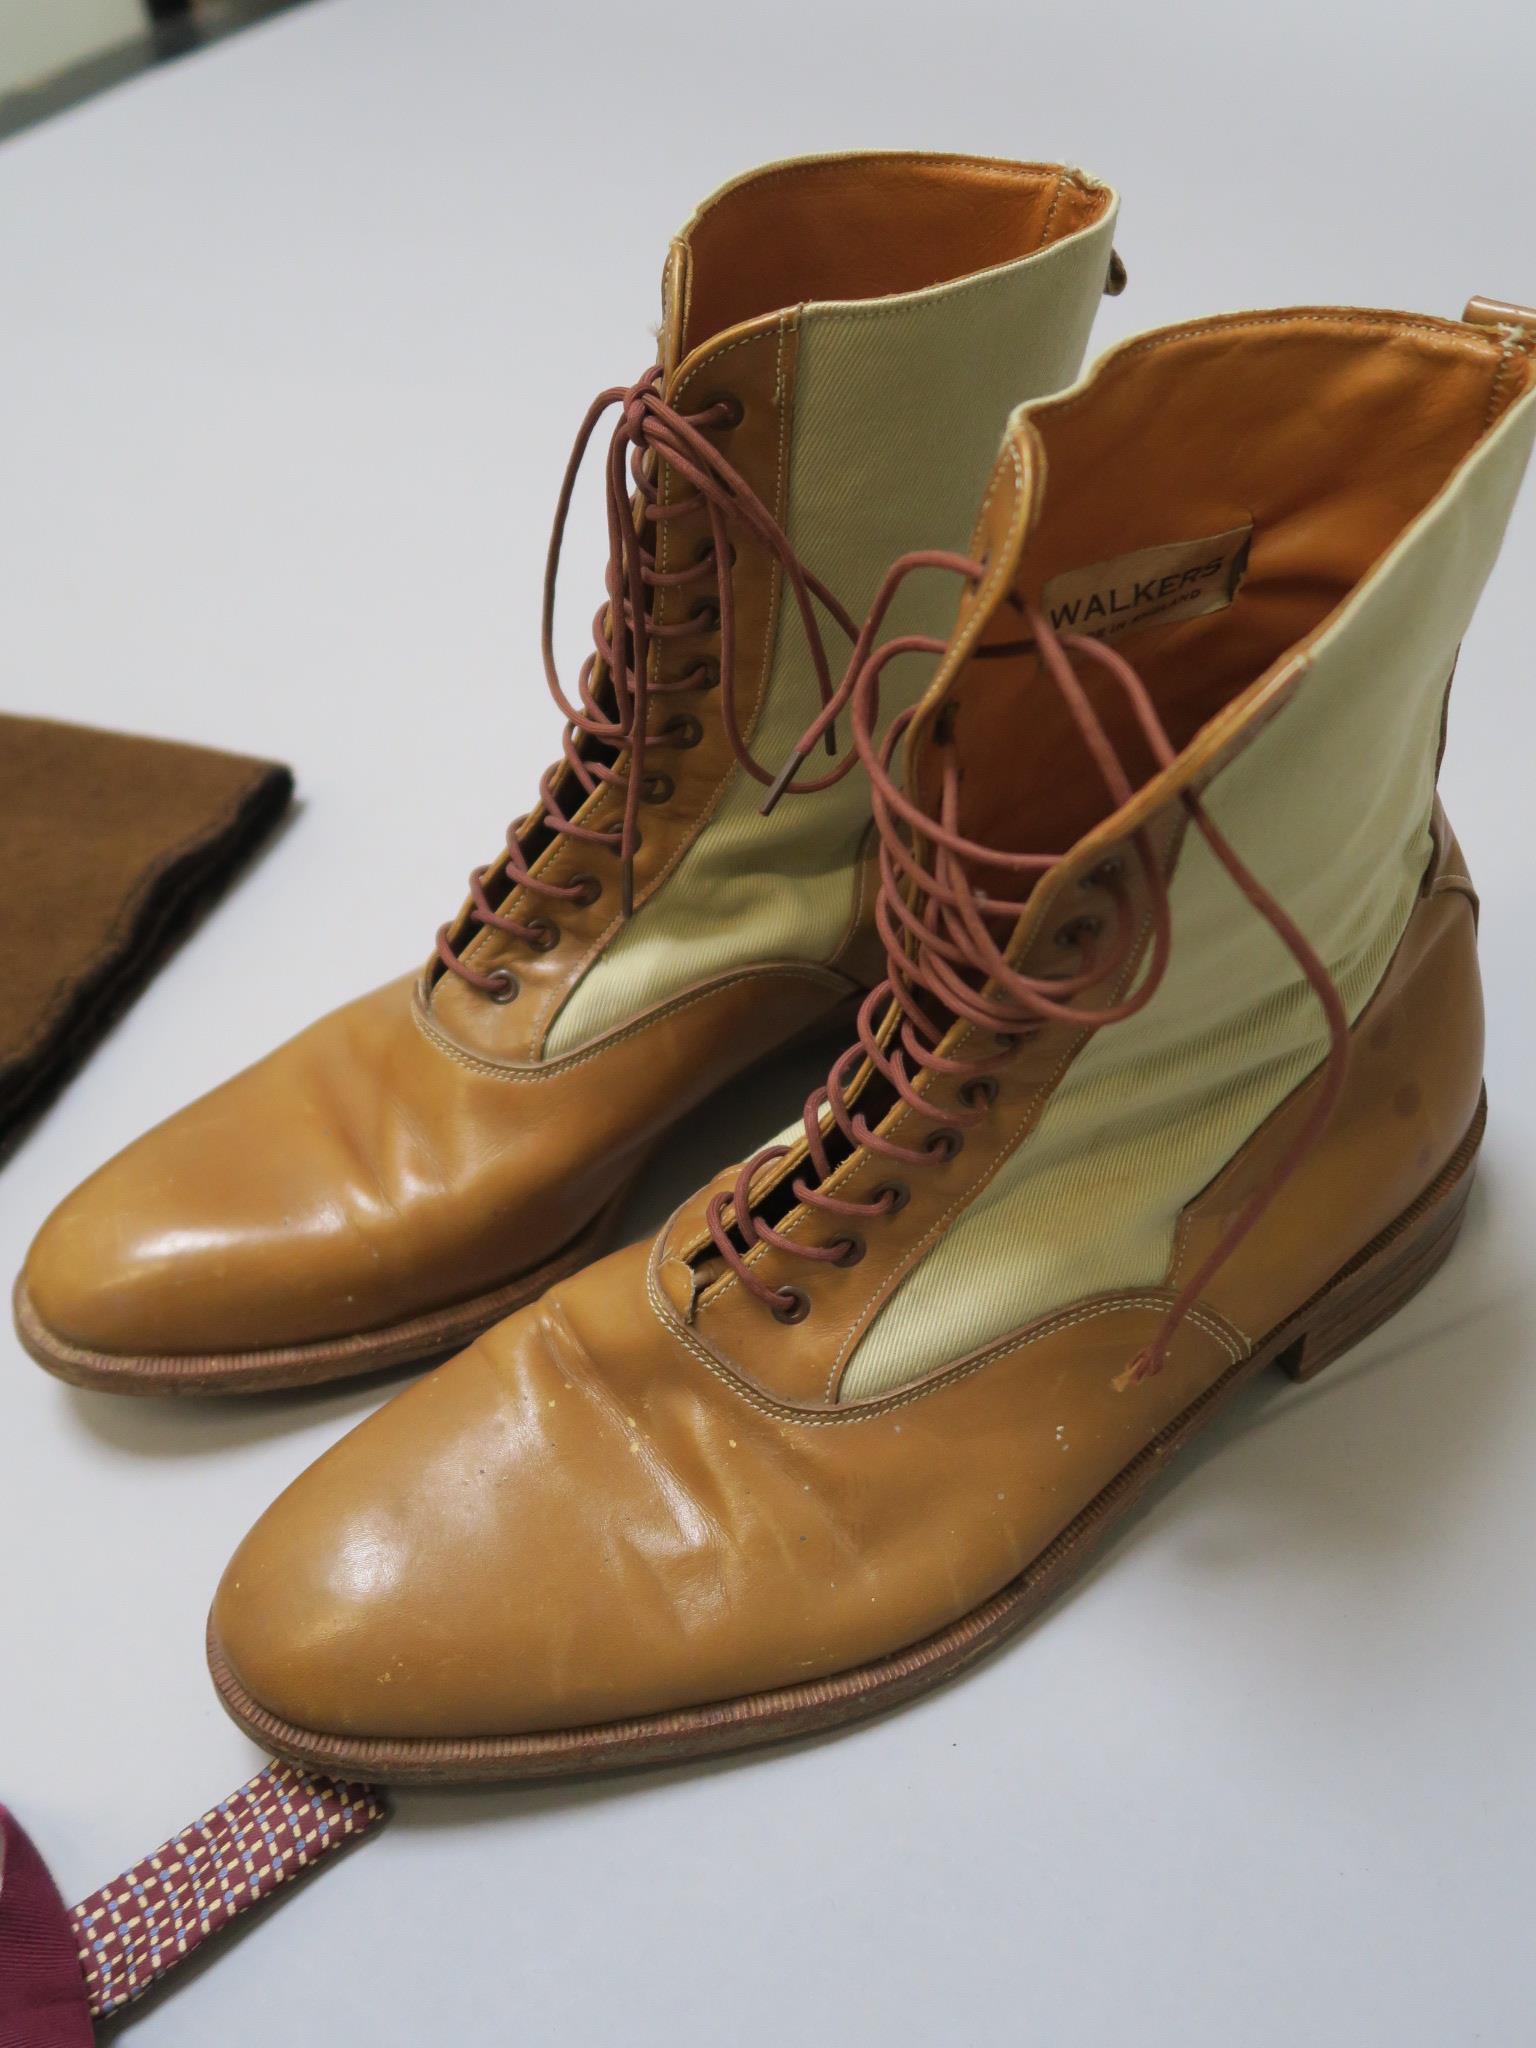 The Rolling Stones Charlie Watts Pale Tan Leather Lace-up boots, Bow Tie, Scarf,  circa 1960/70's - Image 4 of 5